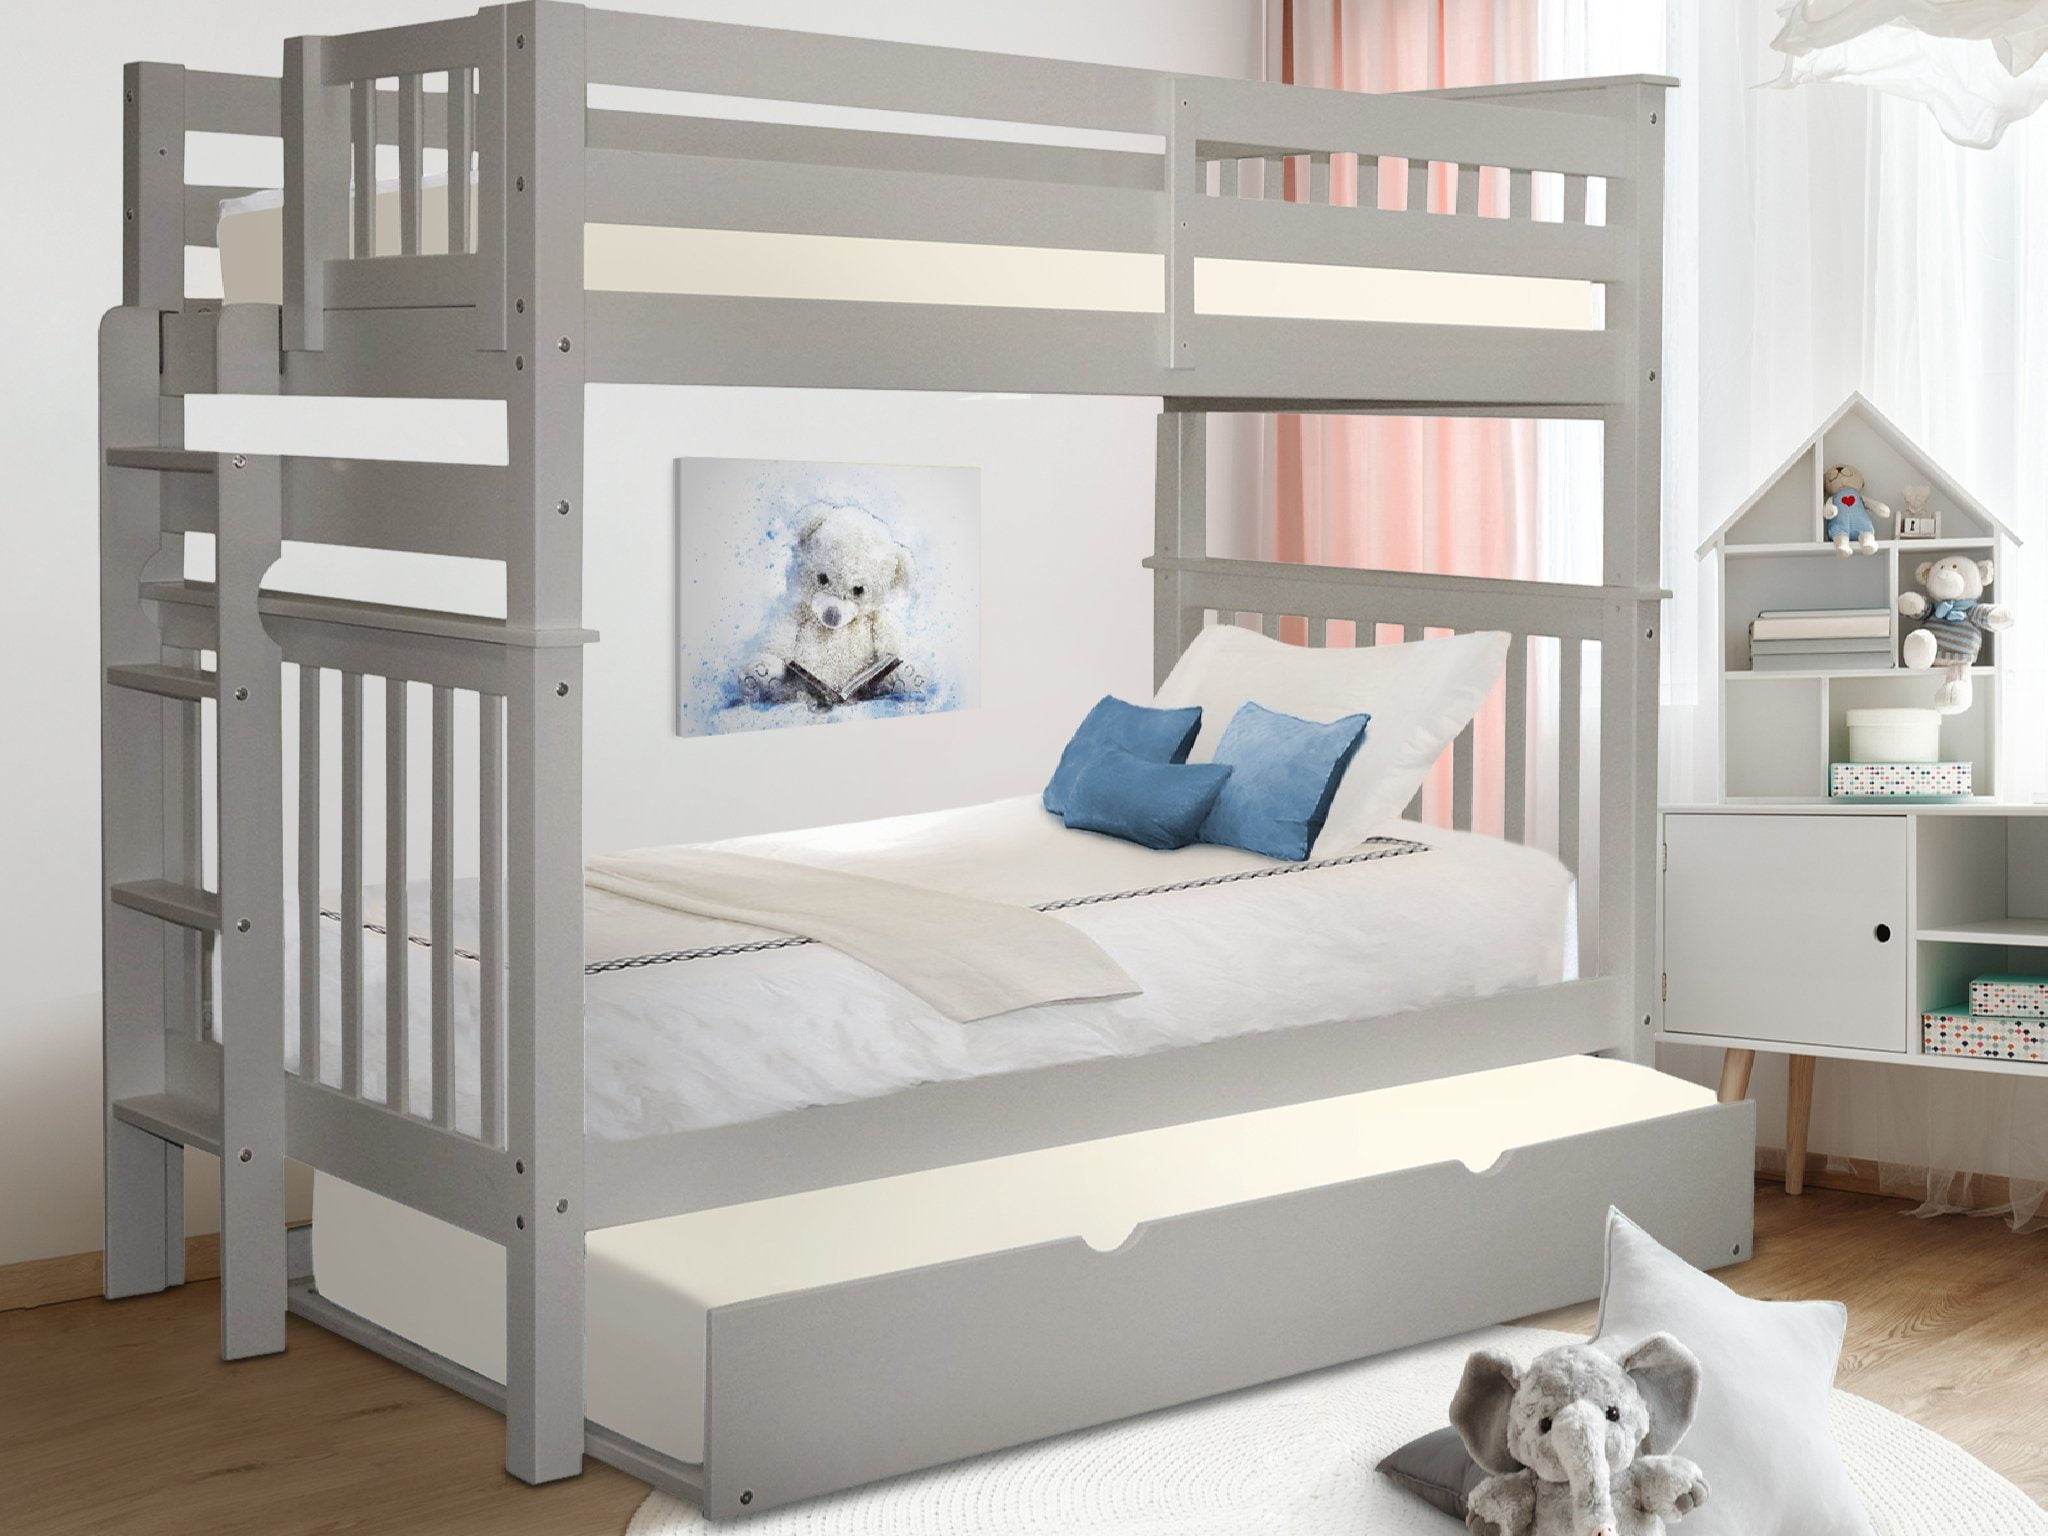 Bedz King Tall Bunk Beds Twin Over, Twin Over King Bunk Bed